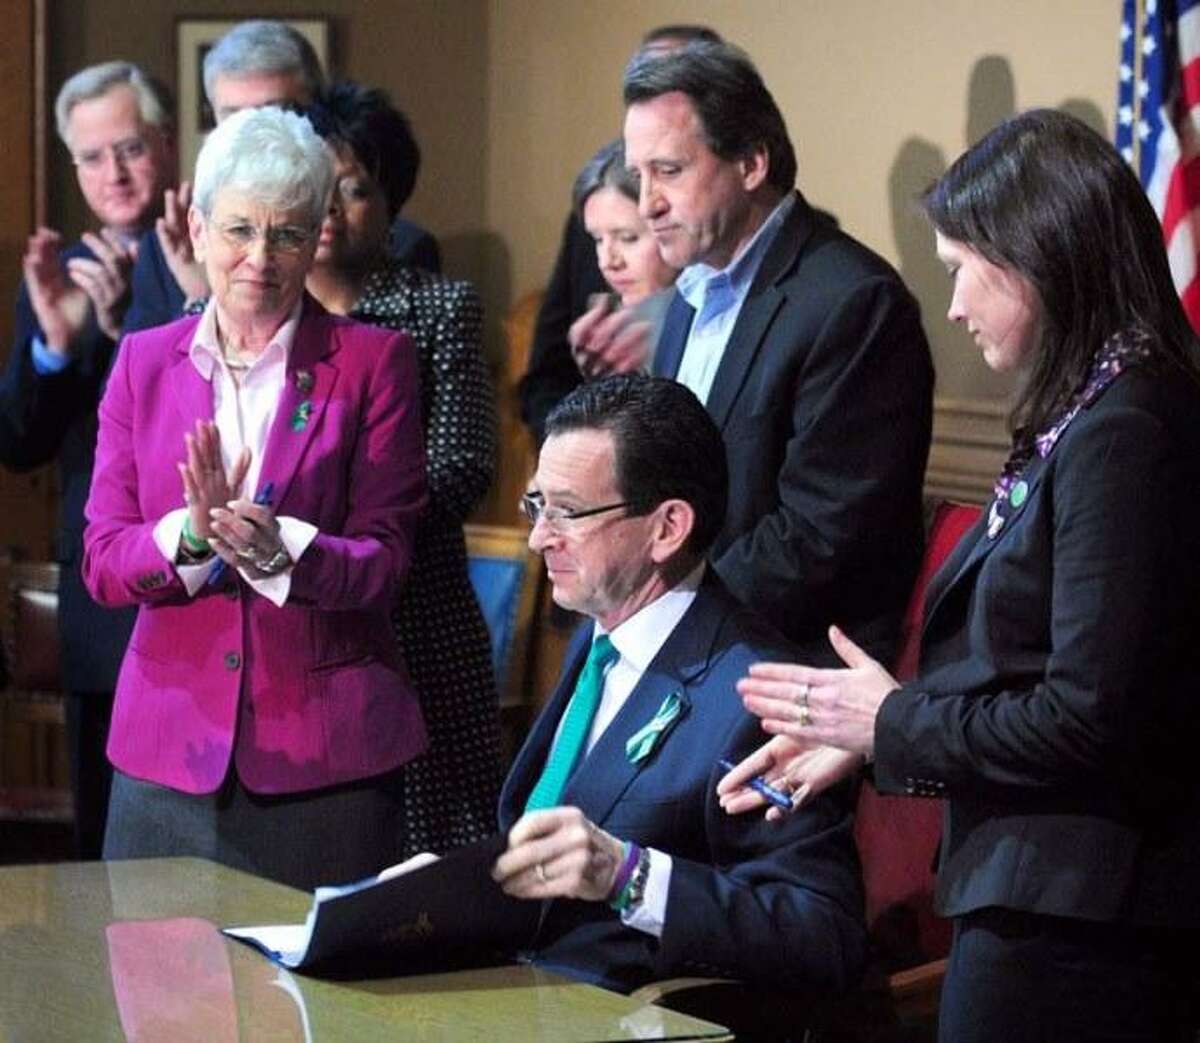 Lt. Governor Nancy Wyman (left), Neil Heslin (top center) and Nicole Hockley (right) applaud as Governor Dannel Malloy (center bottom) completes the signing the Gun Violence Prevention and Child Safety Act at the Capitol in Hartford on 4/4/2013. Photo by Arnold Gold/New Haven Register